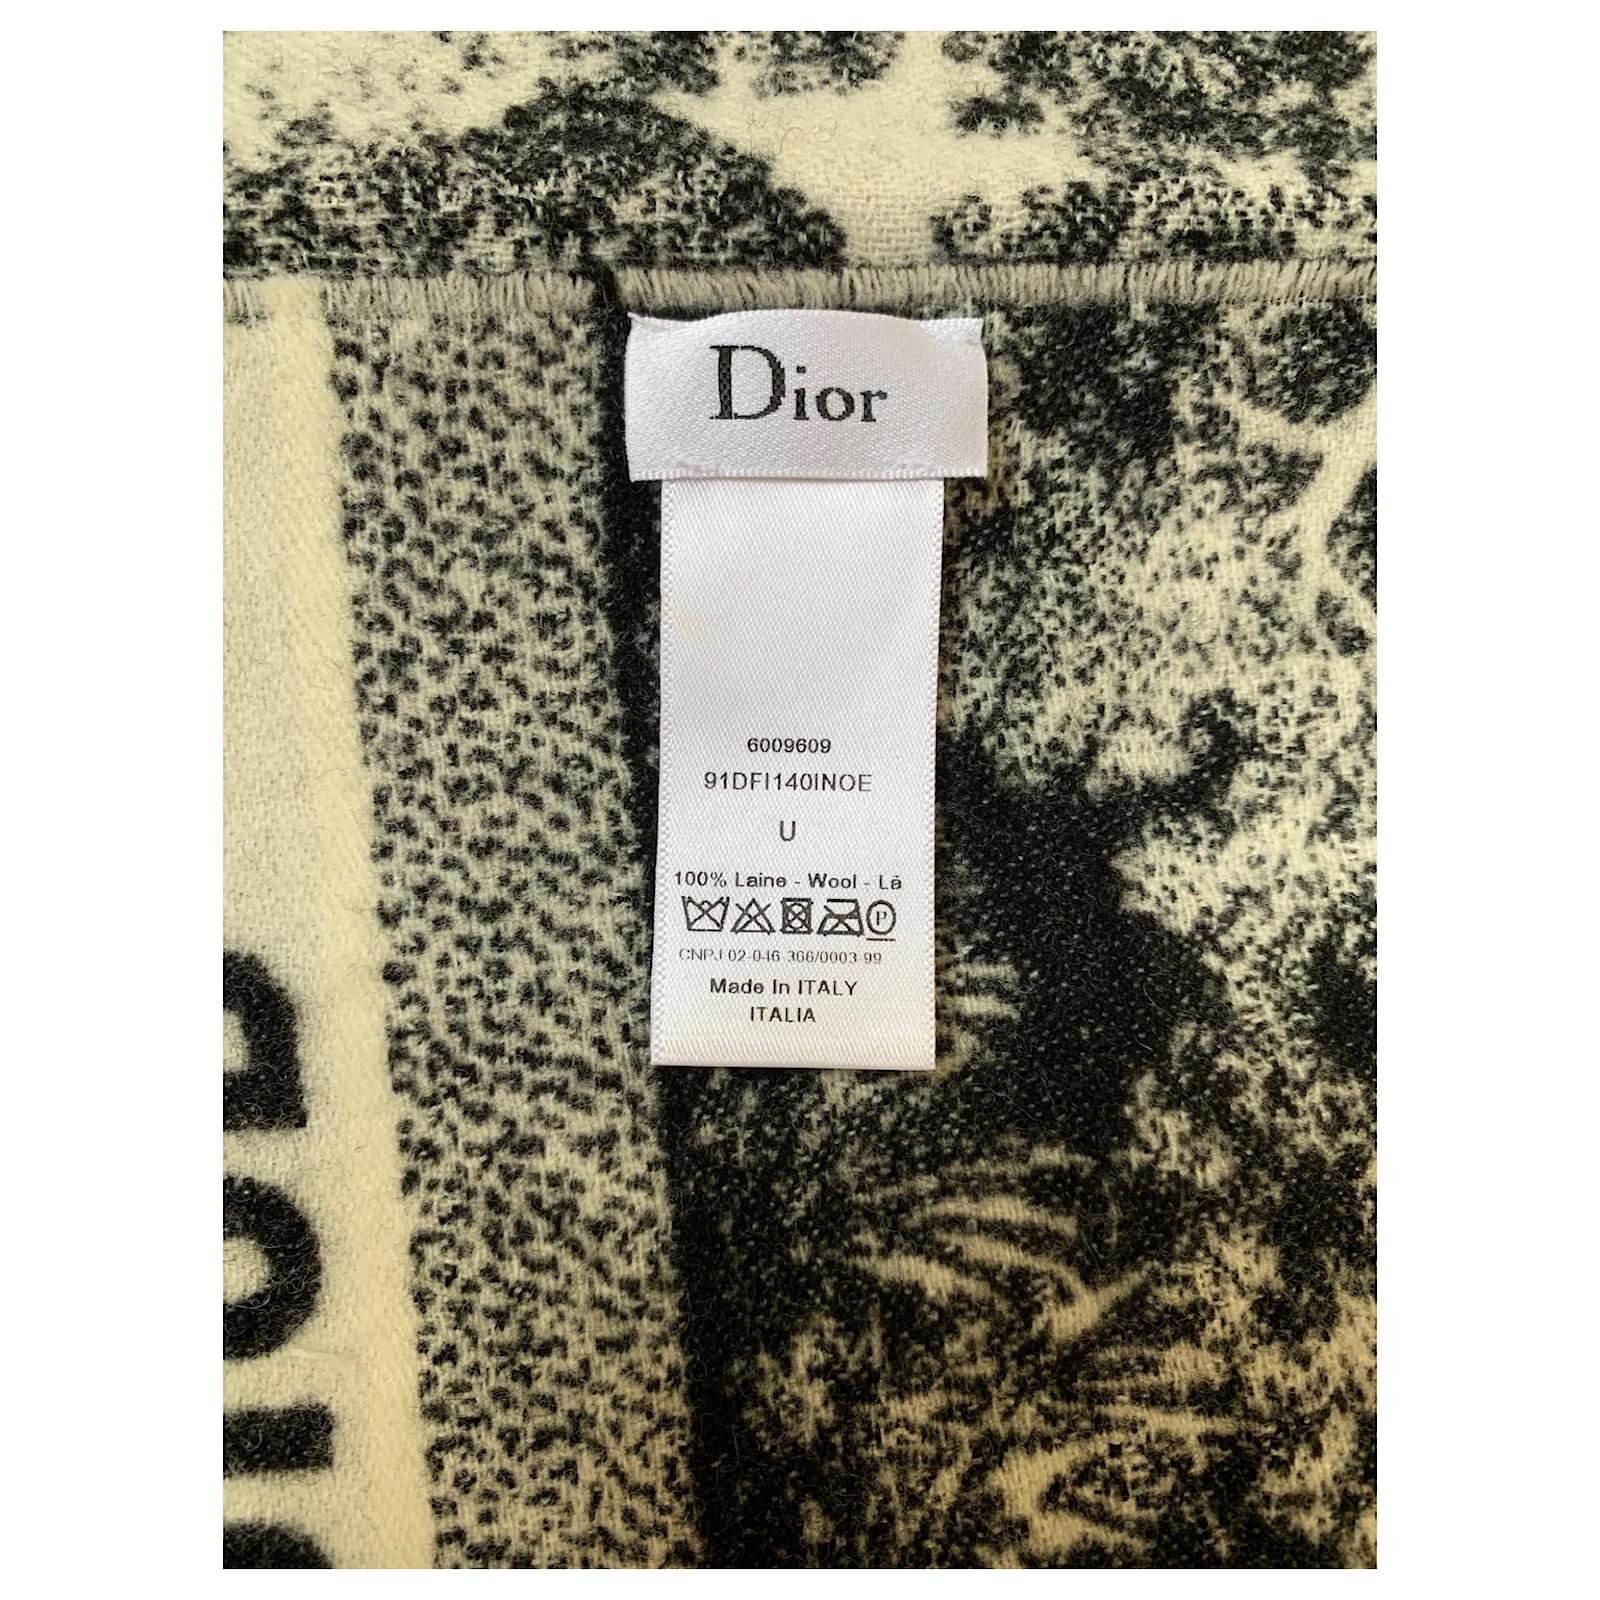 The toile de Jouy fabric from the Dior Cruise 2019 – step by step